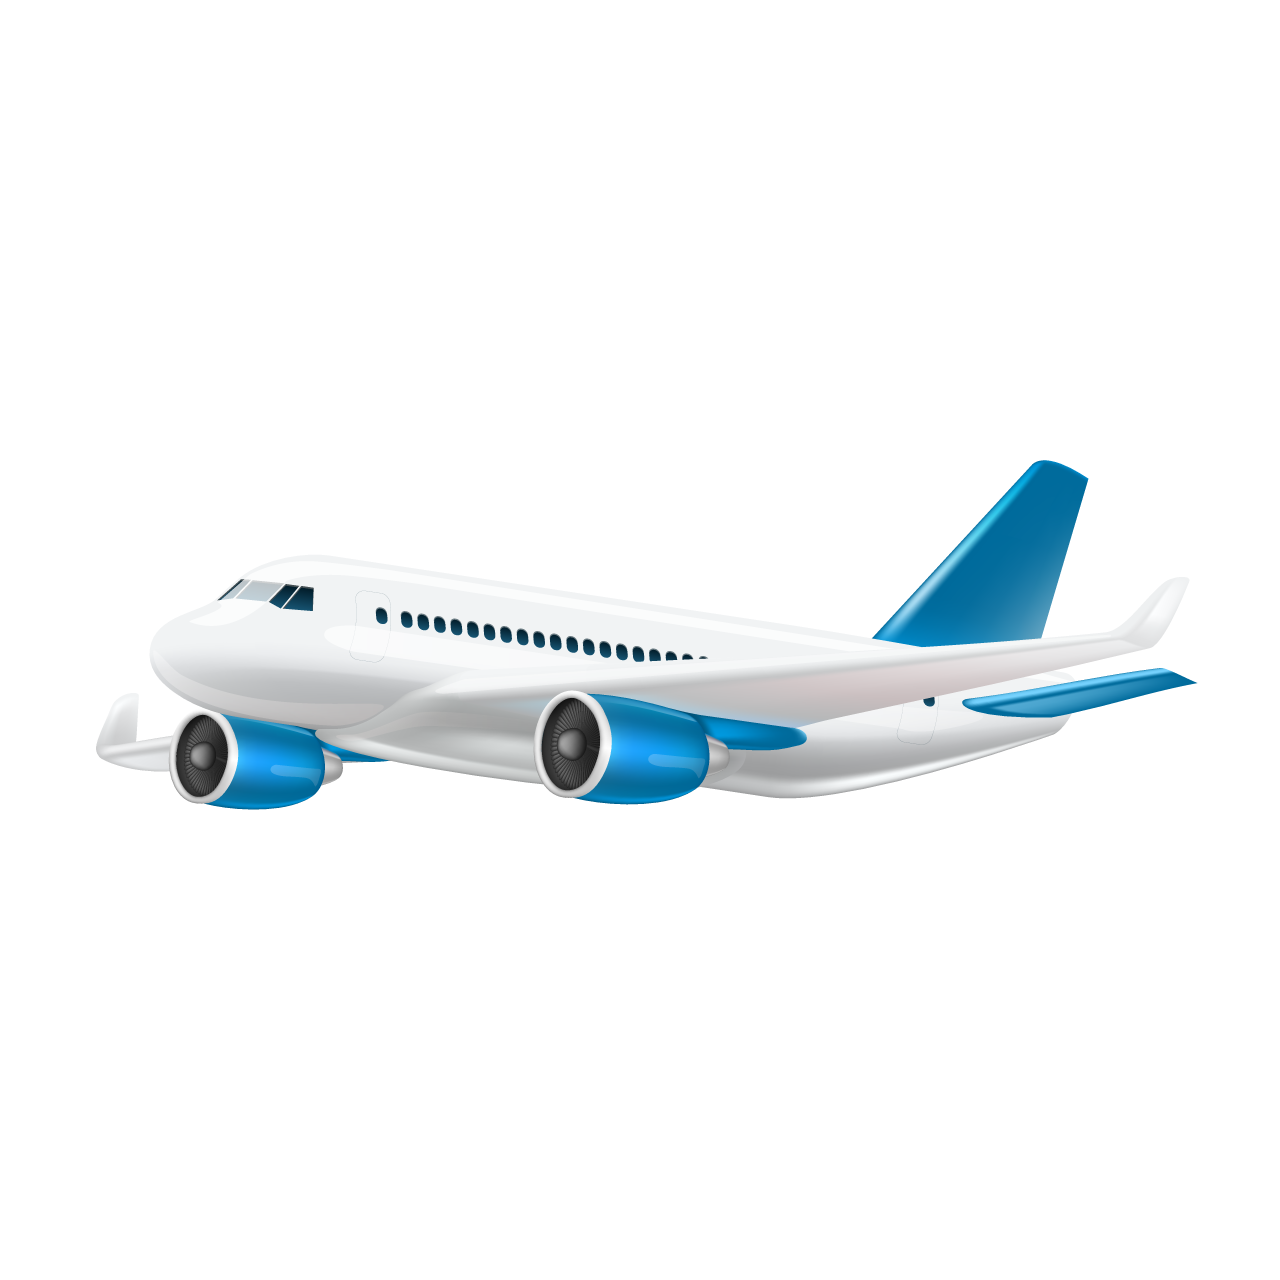 airplane take off clipart